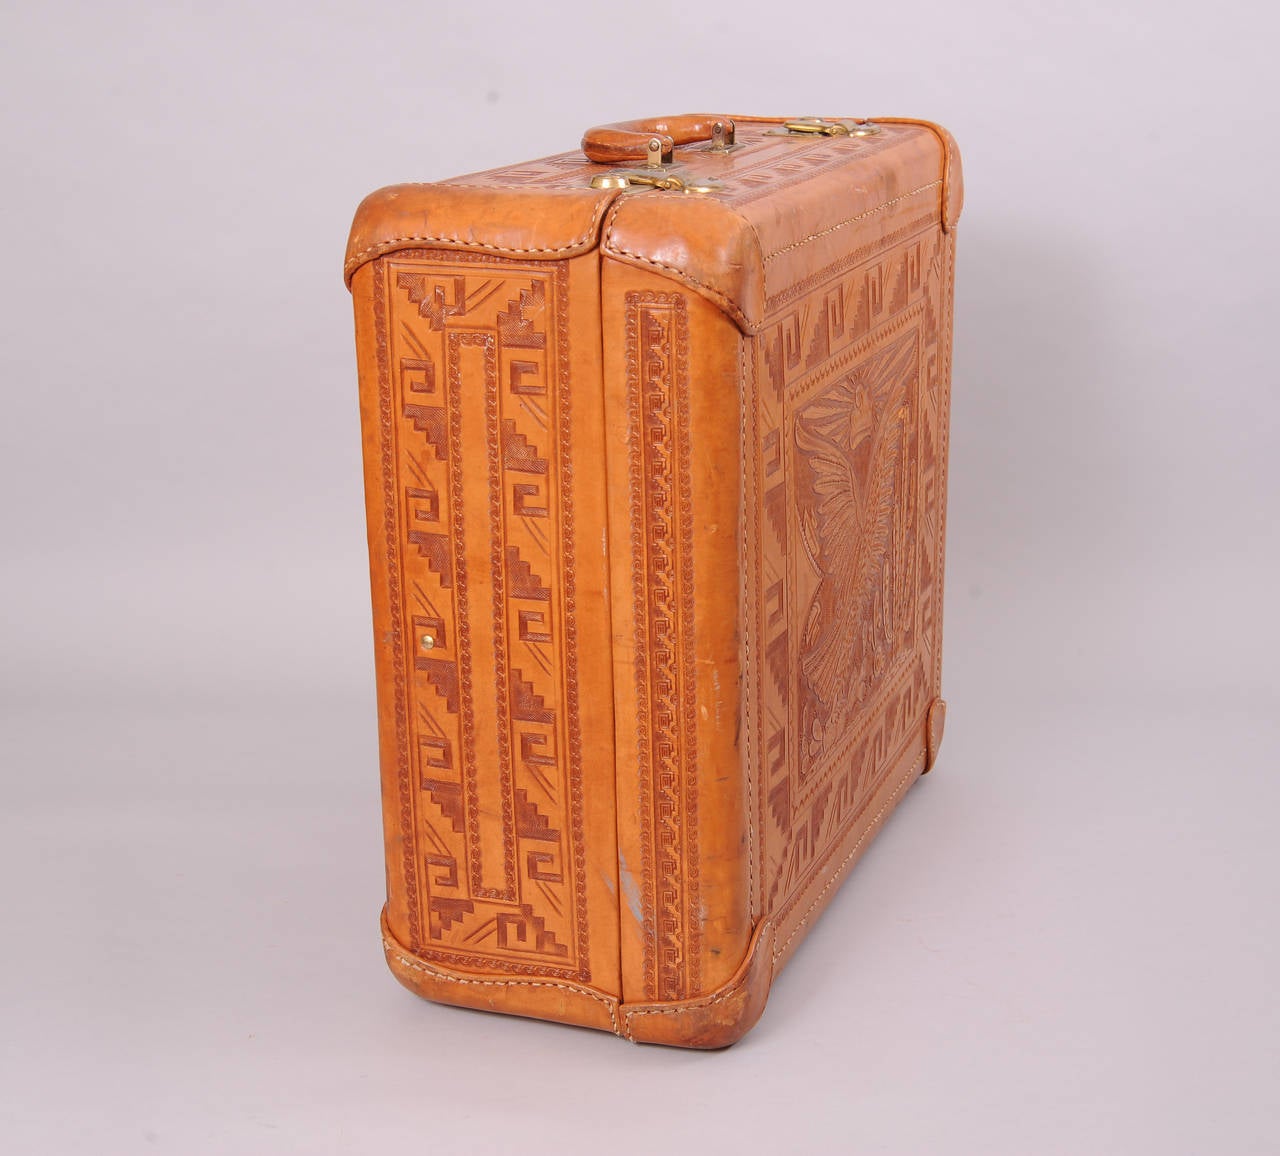 Covered with exquisite hand work, this leather suitcase, circa 1950, has a large bird in a cactus garden on the front. This panel is surrounded by a border of scallops, bold geometric designs, and decorative waves. This border is repeated on all